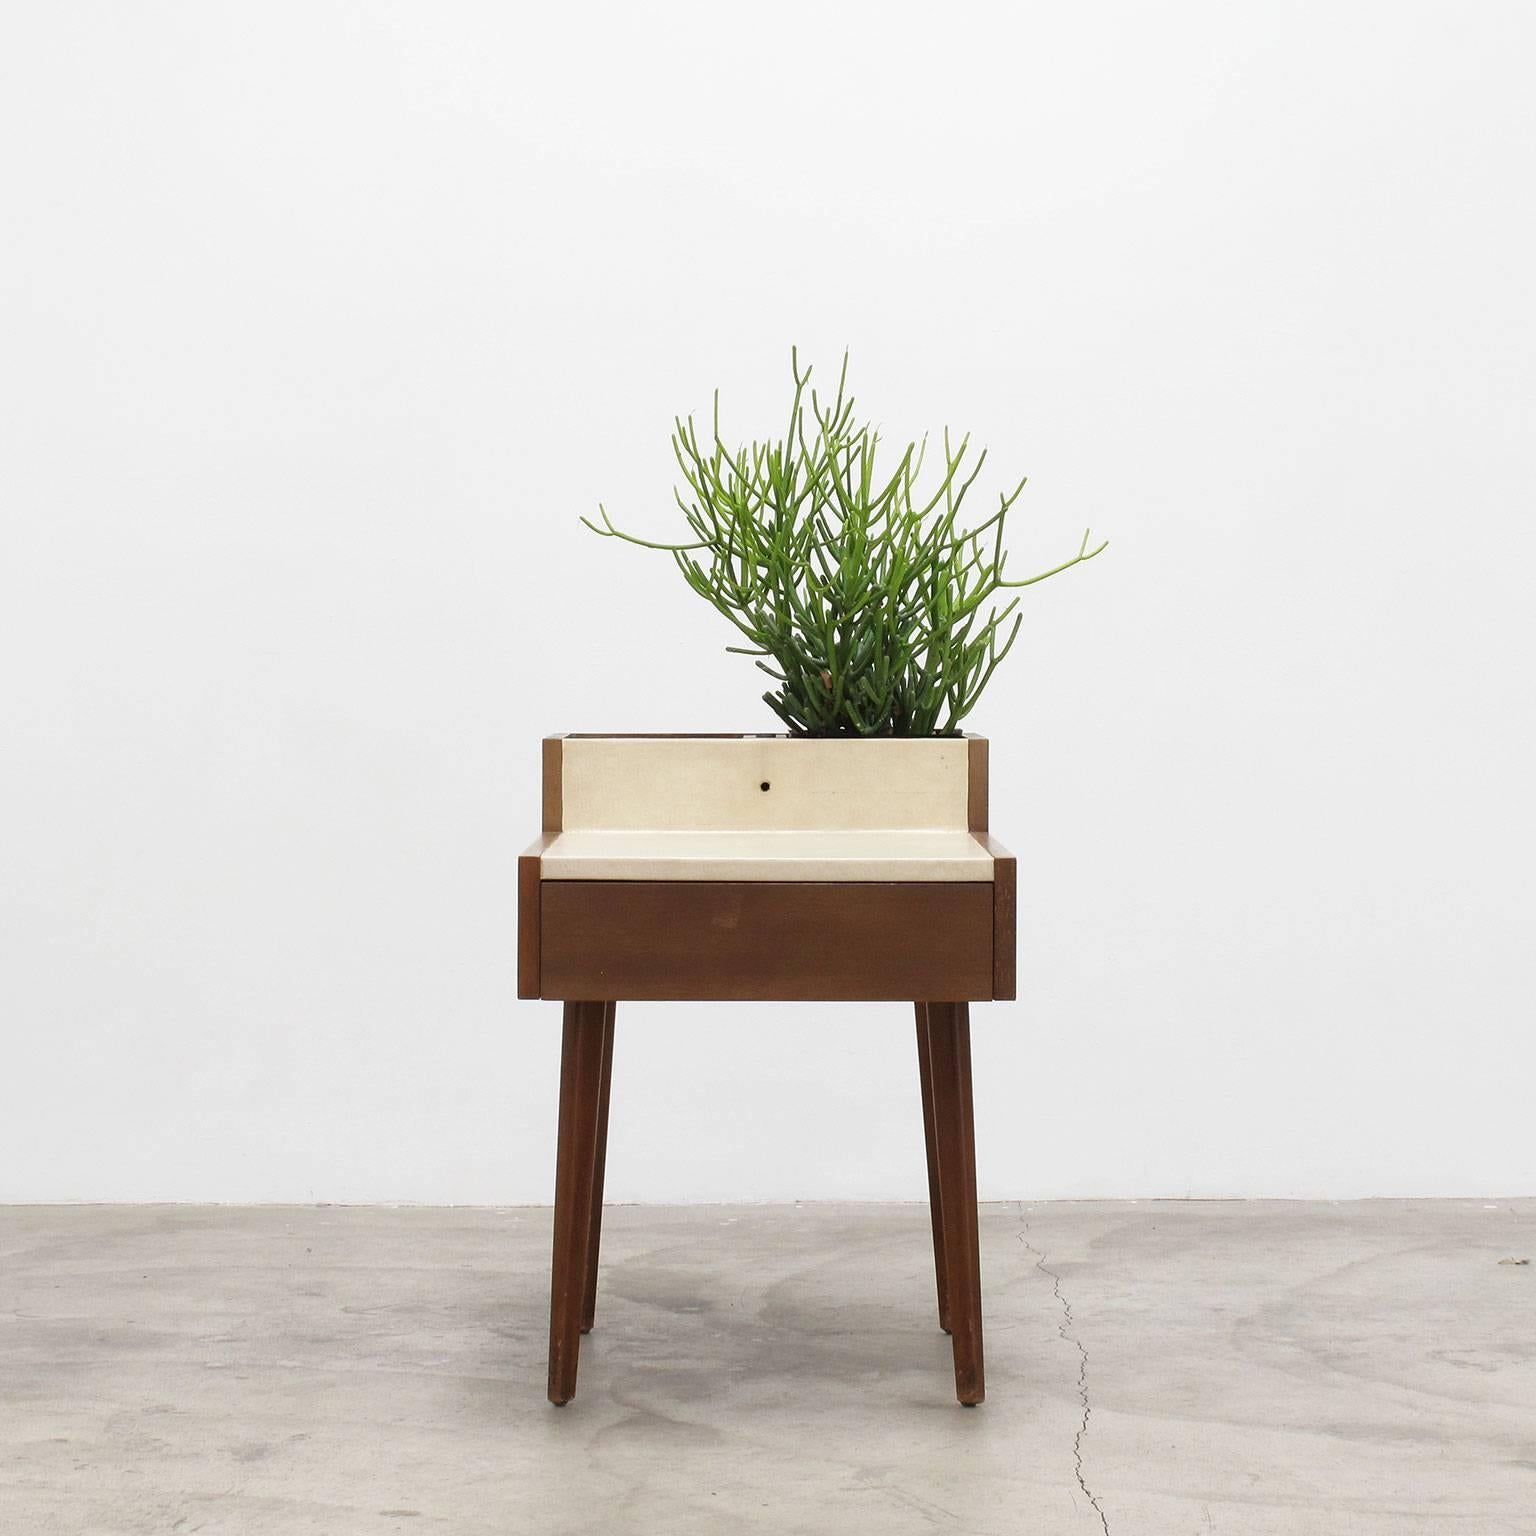 George Nelson
Planter table, 1950s
Herman Miller

Iconic side table in walnut with cream white leather wrapped top surface, finely tapered legs, slightly splayed, and two square compartments with original copper plant boxes, interior of drawer